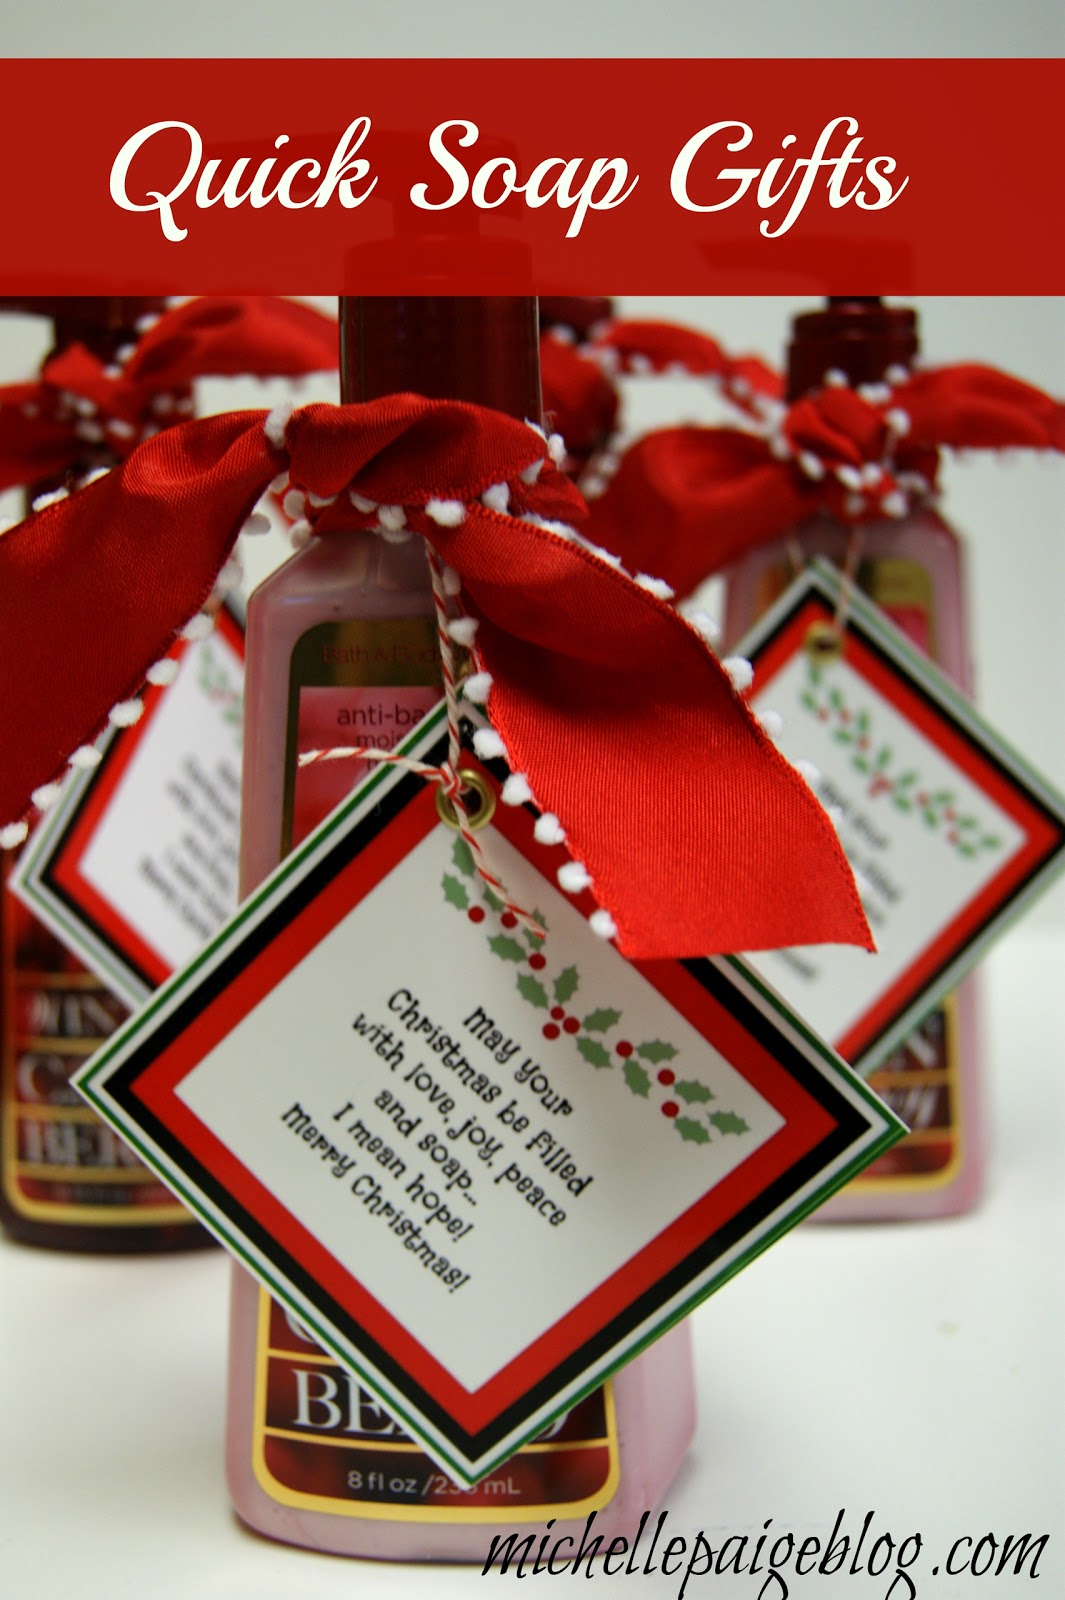 michelle paige blogs: Quick Soap Gift for Christmas